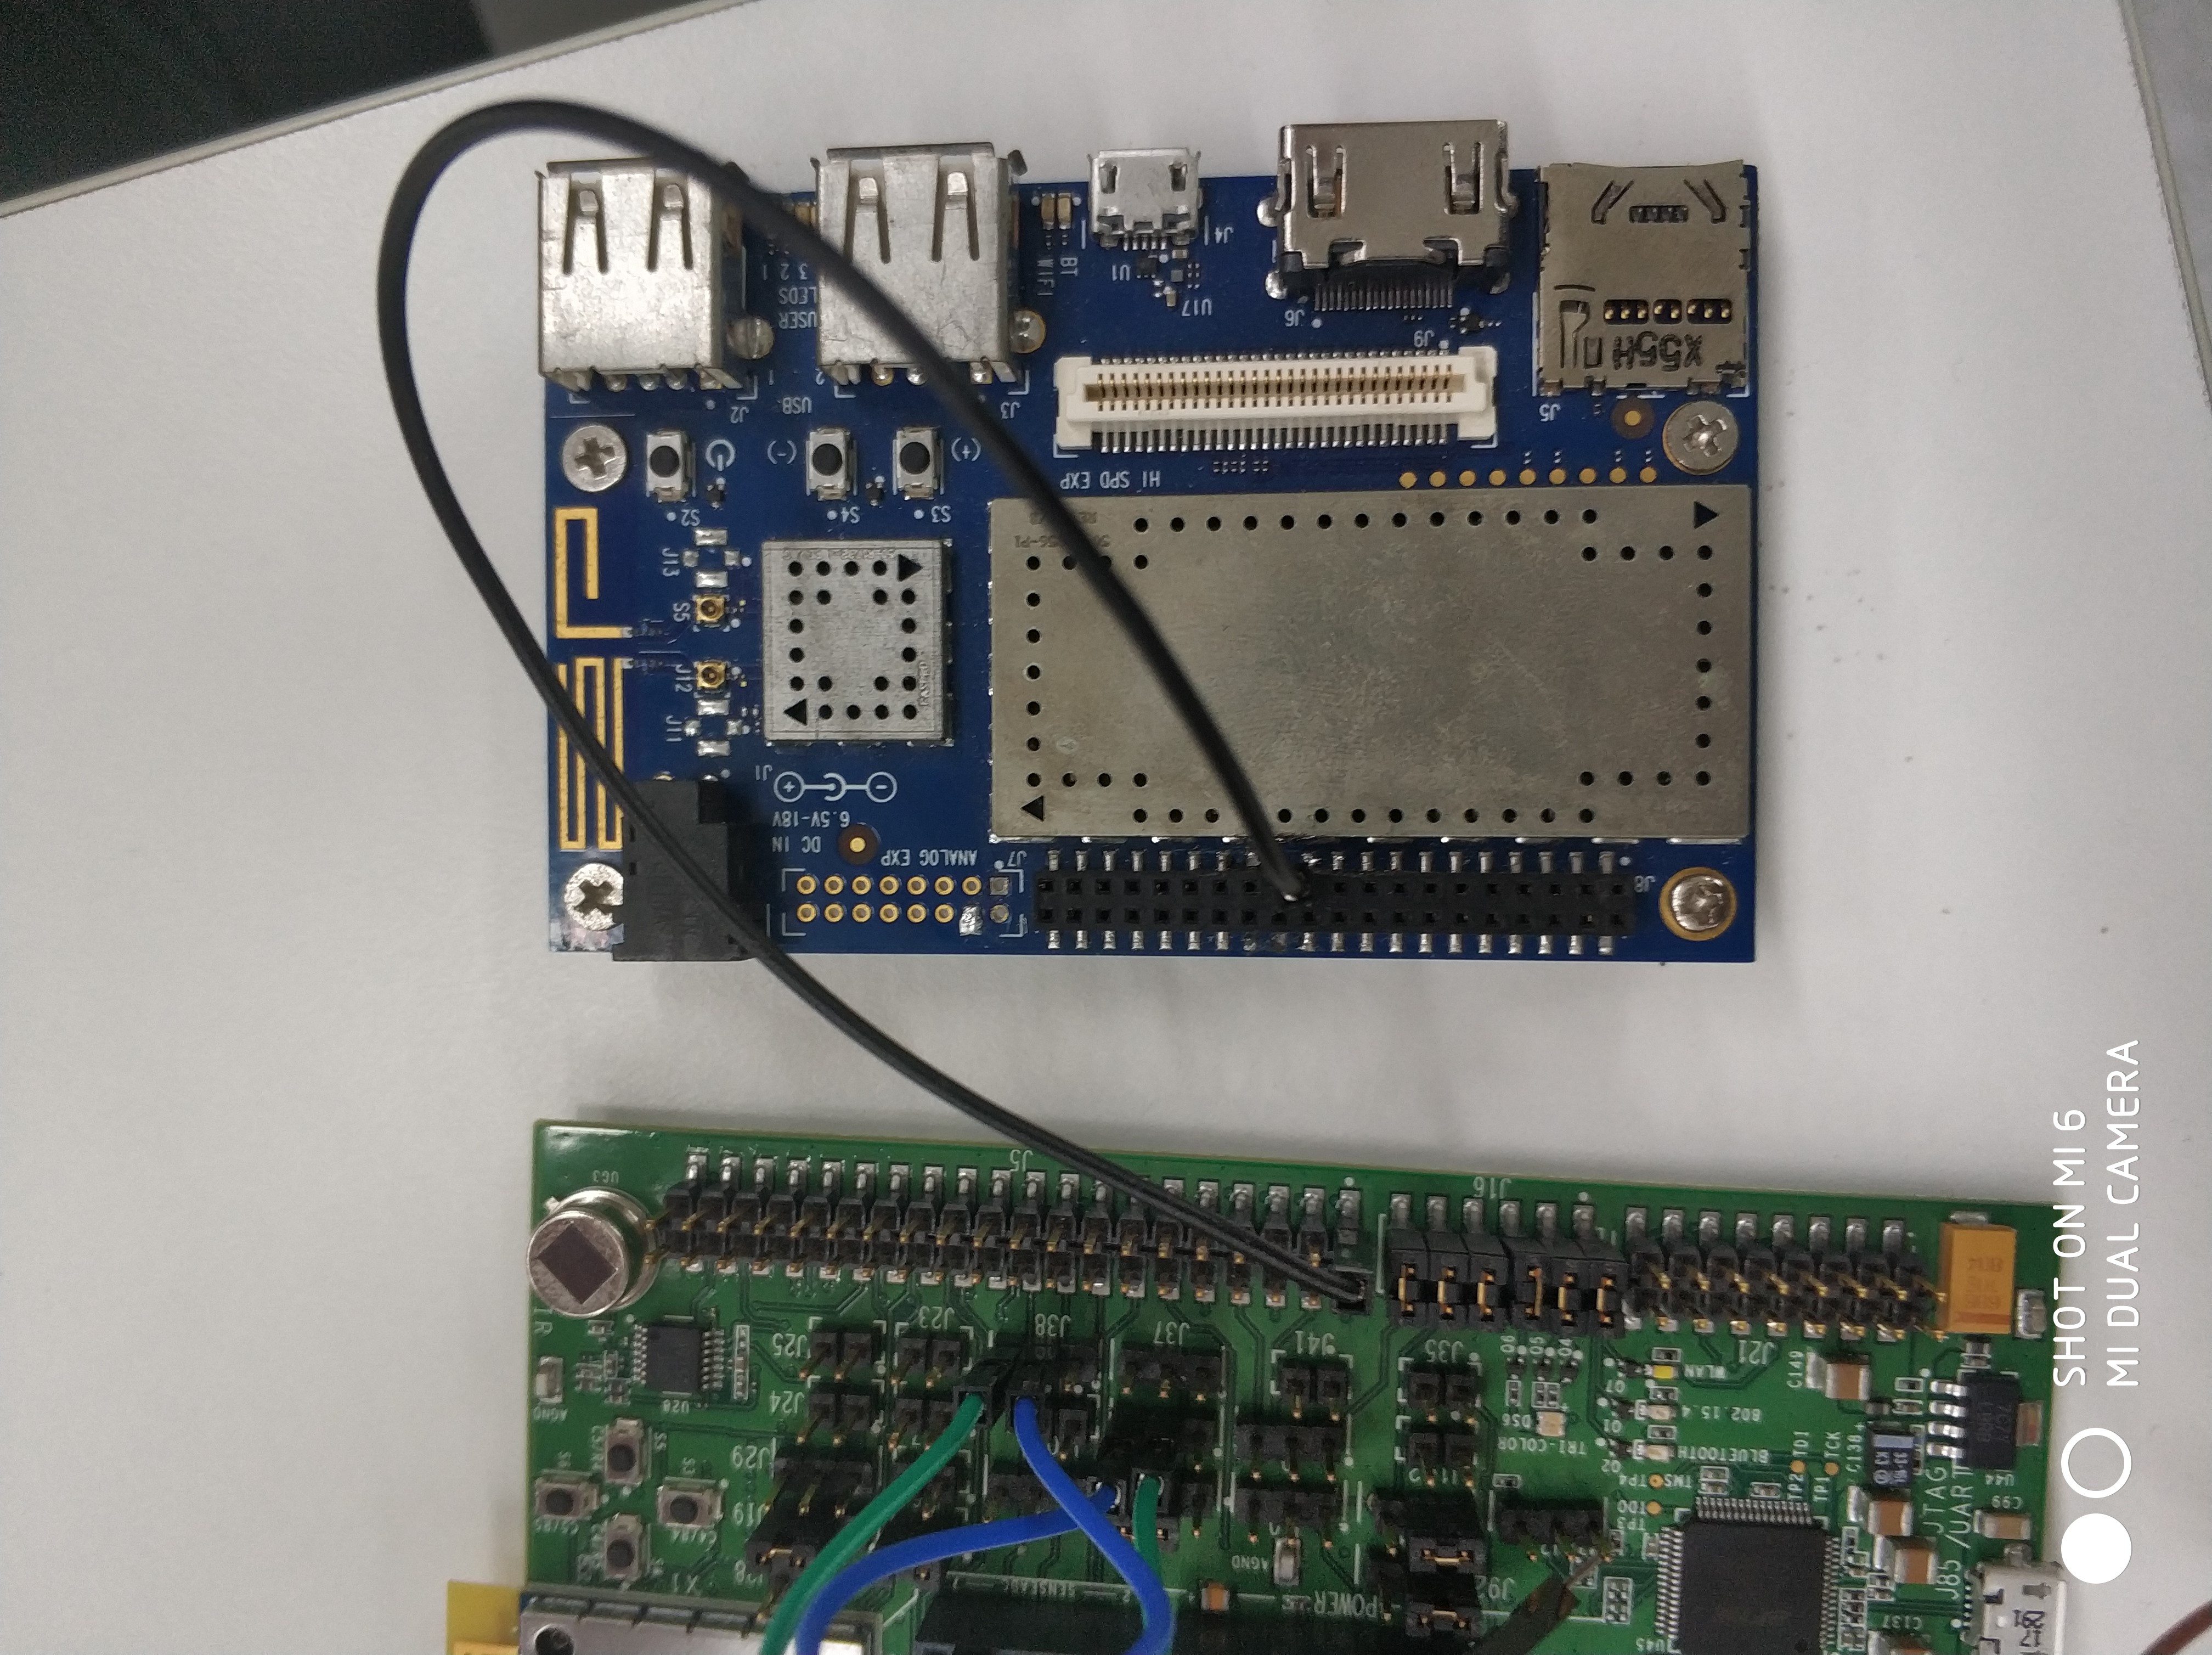 Connecting the QCA4020 board to the DragonBoard 410c